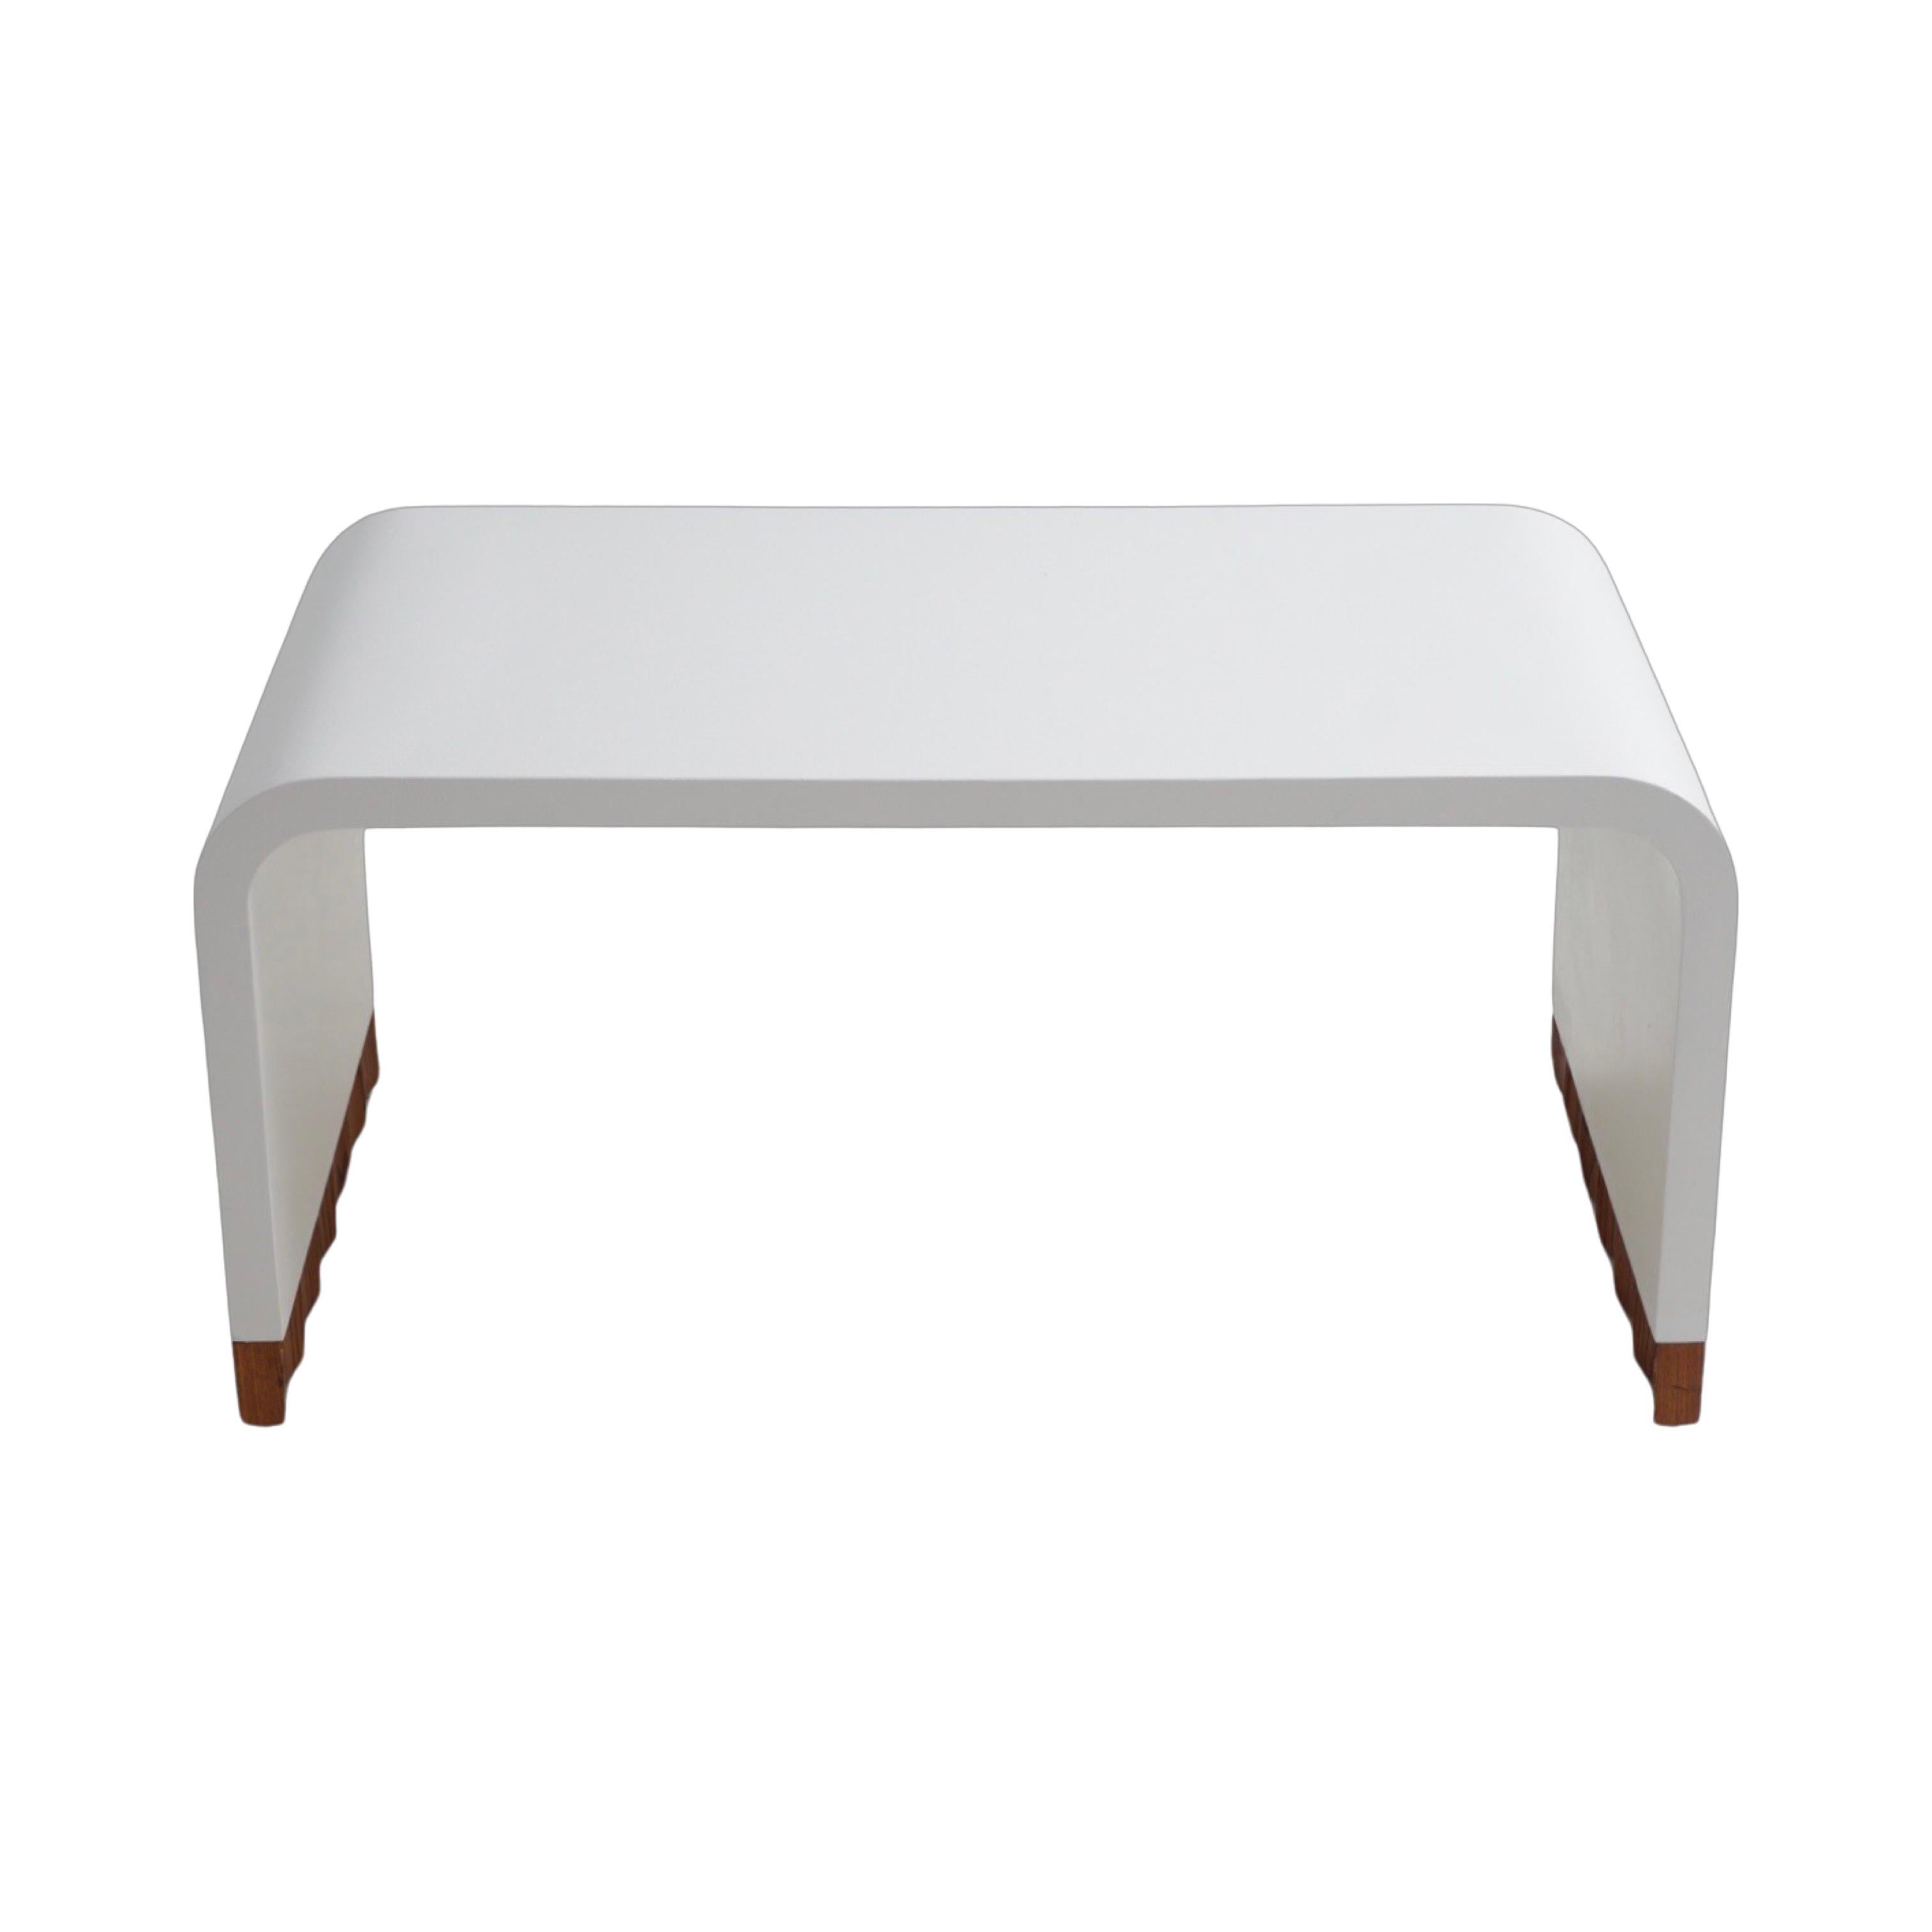 Slick, sleek, and dazzling in white, this waterfall coffee table may mesmerize you with its curves and blind you with its striking beauty. The wood zig-zag base of the table adds a quirky flair to a classic design that your coolest interior design